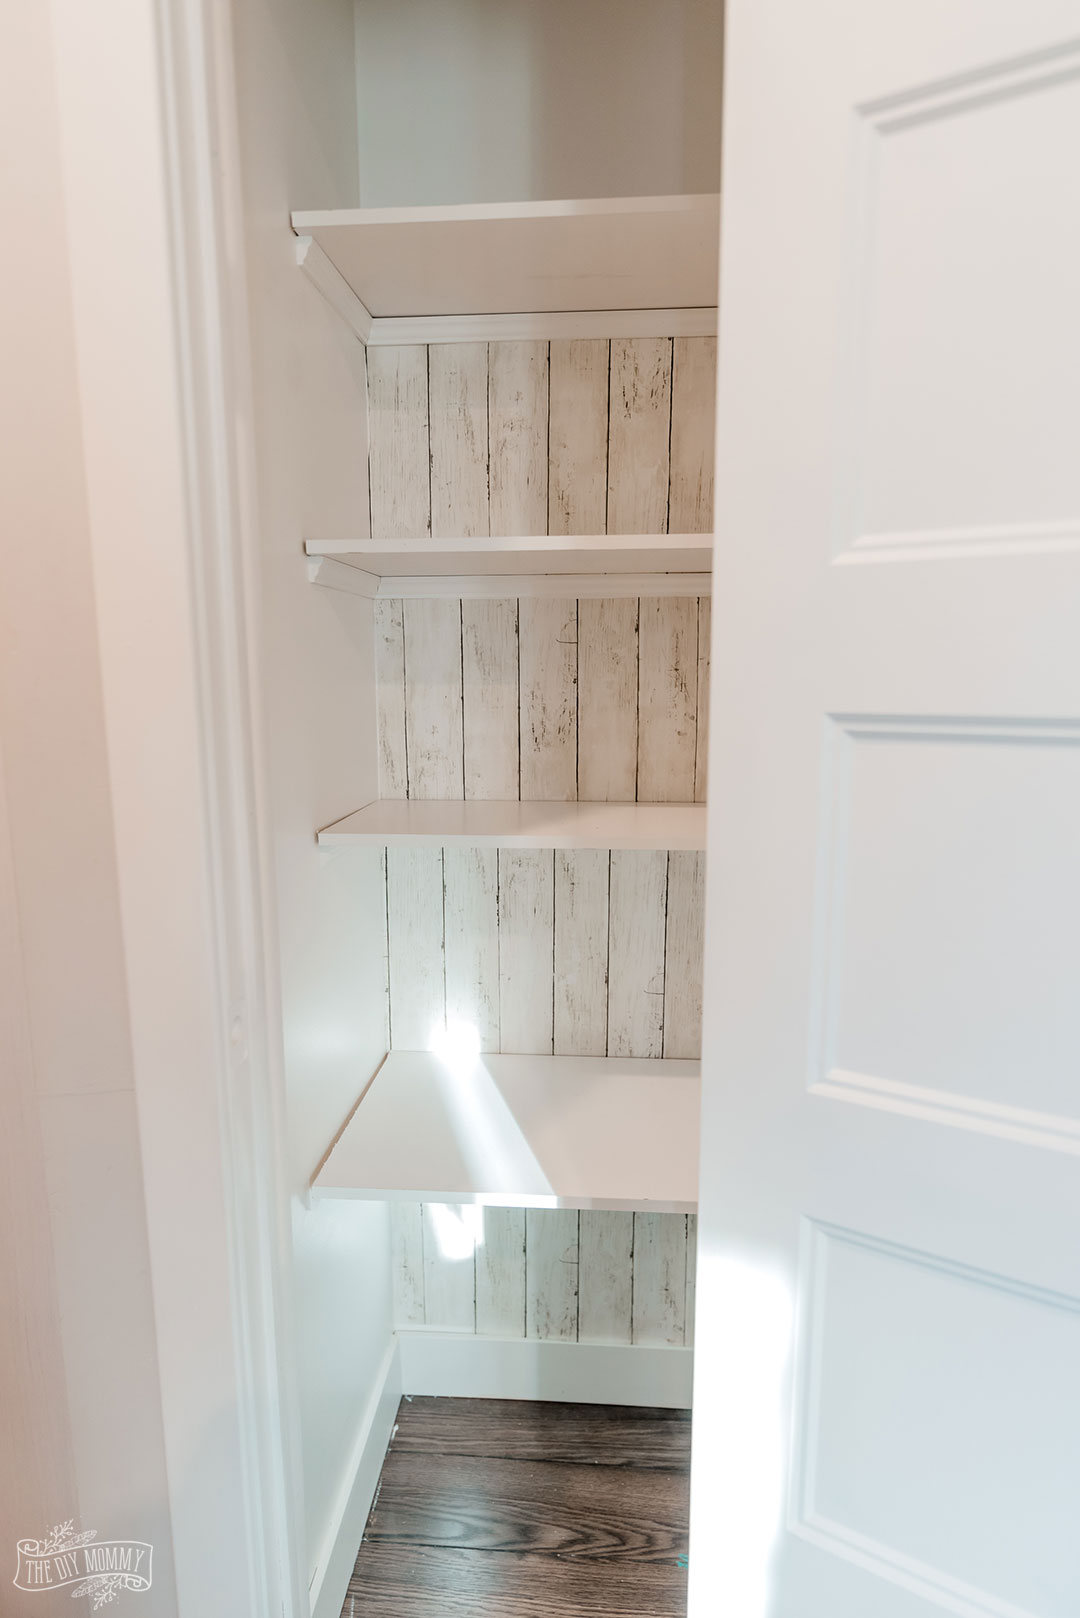 How to turn a tiny, useless closet into a useful, organized small pantry.